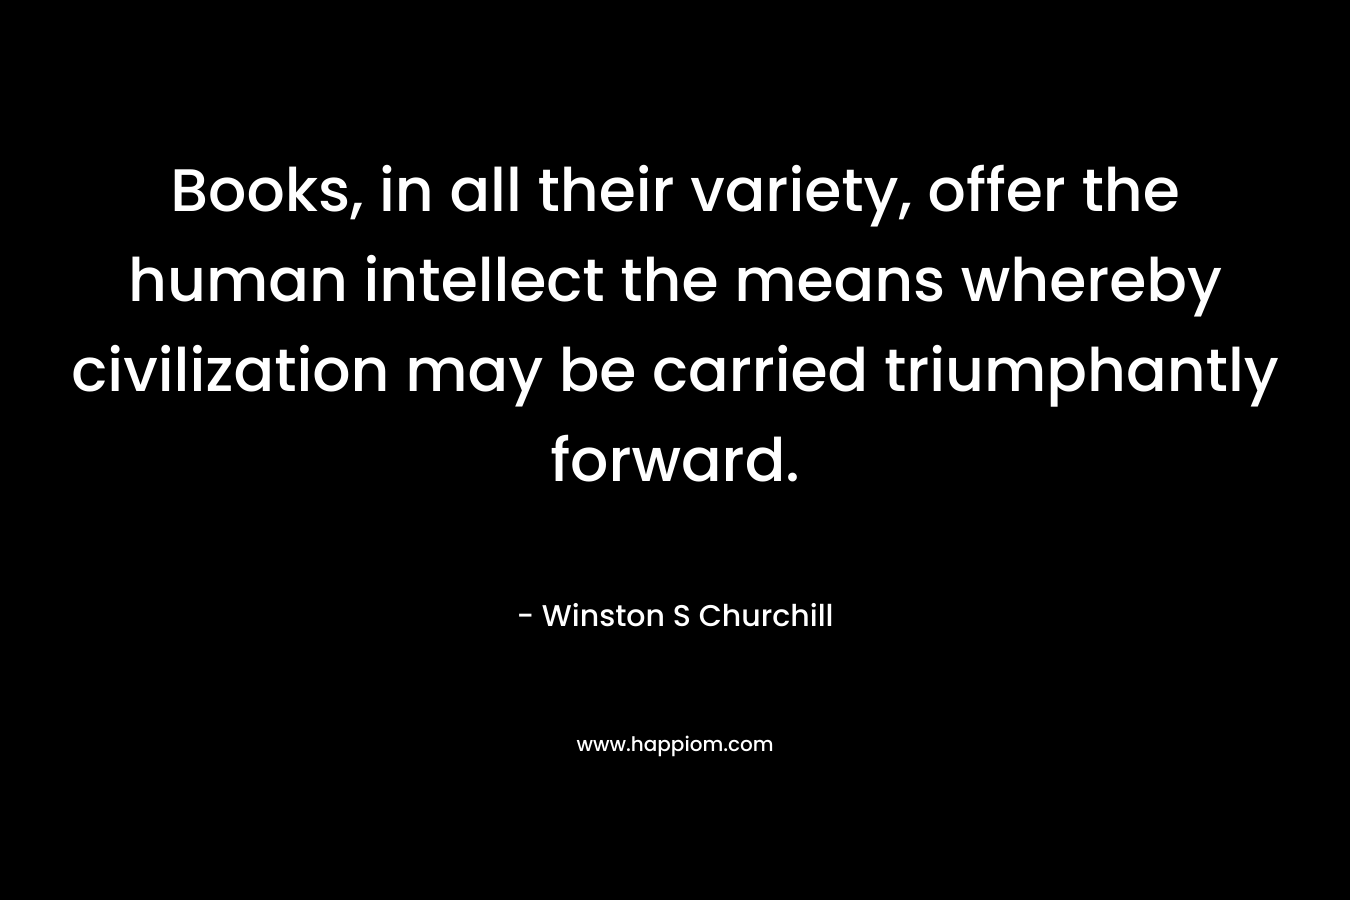 Books, in all their variety, offer the human intellect the means whereby civilization may be carried triumphantly forward. – Winston S Churchill